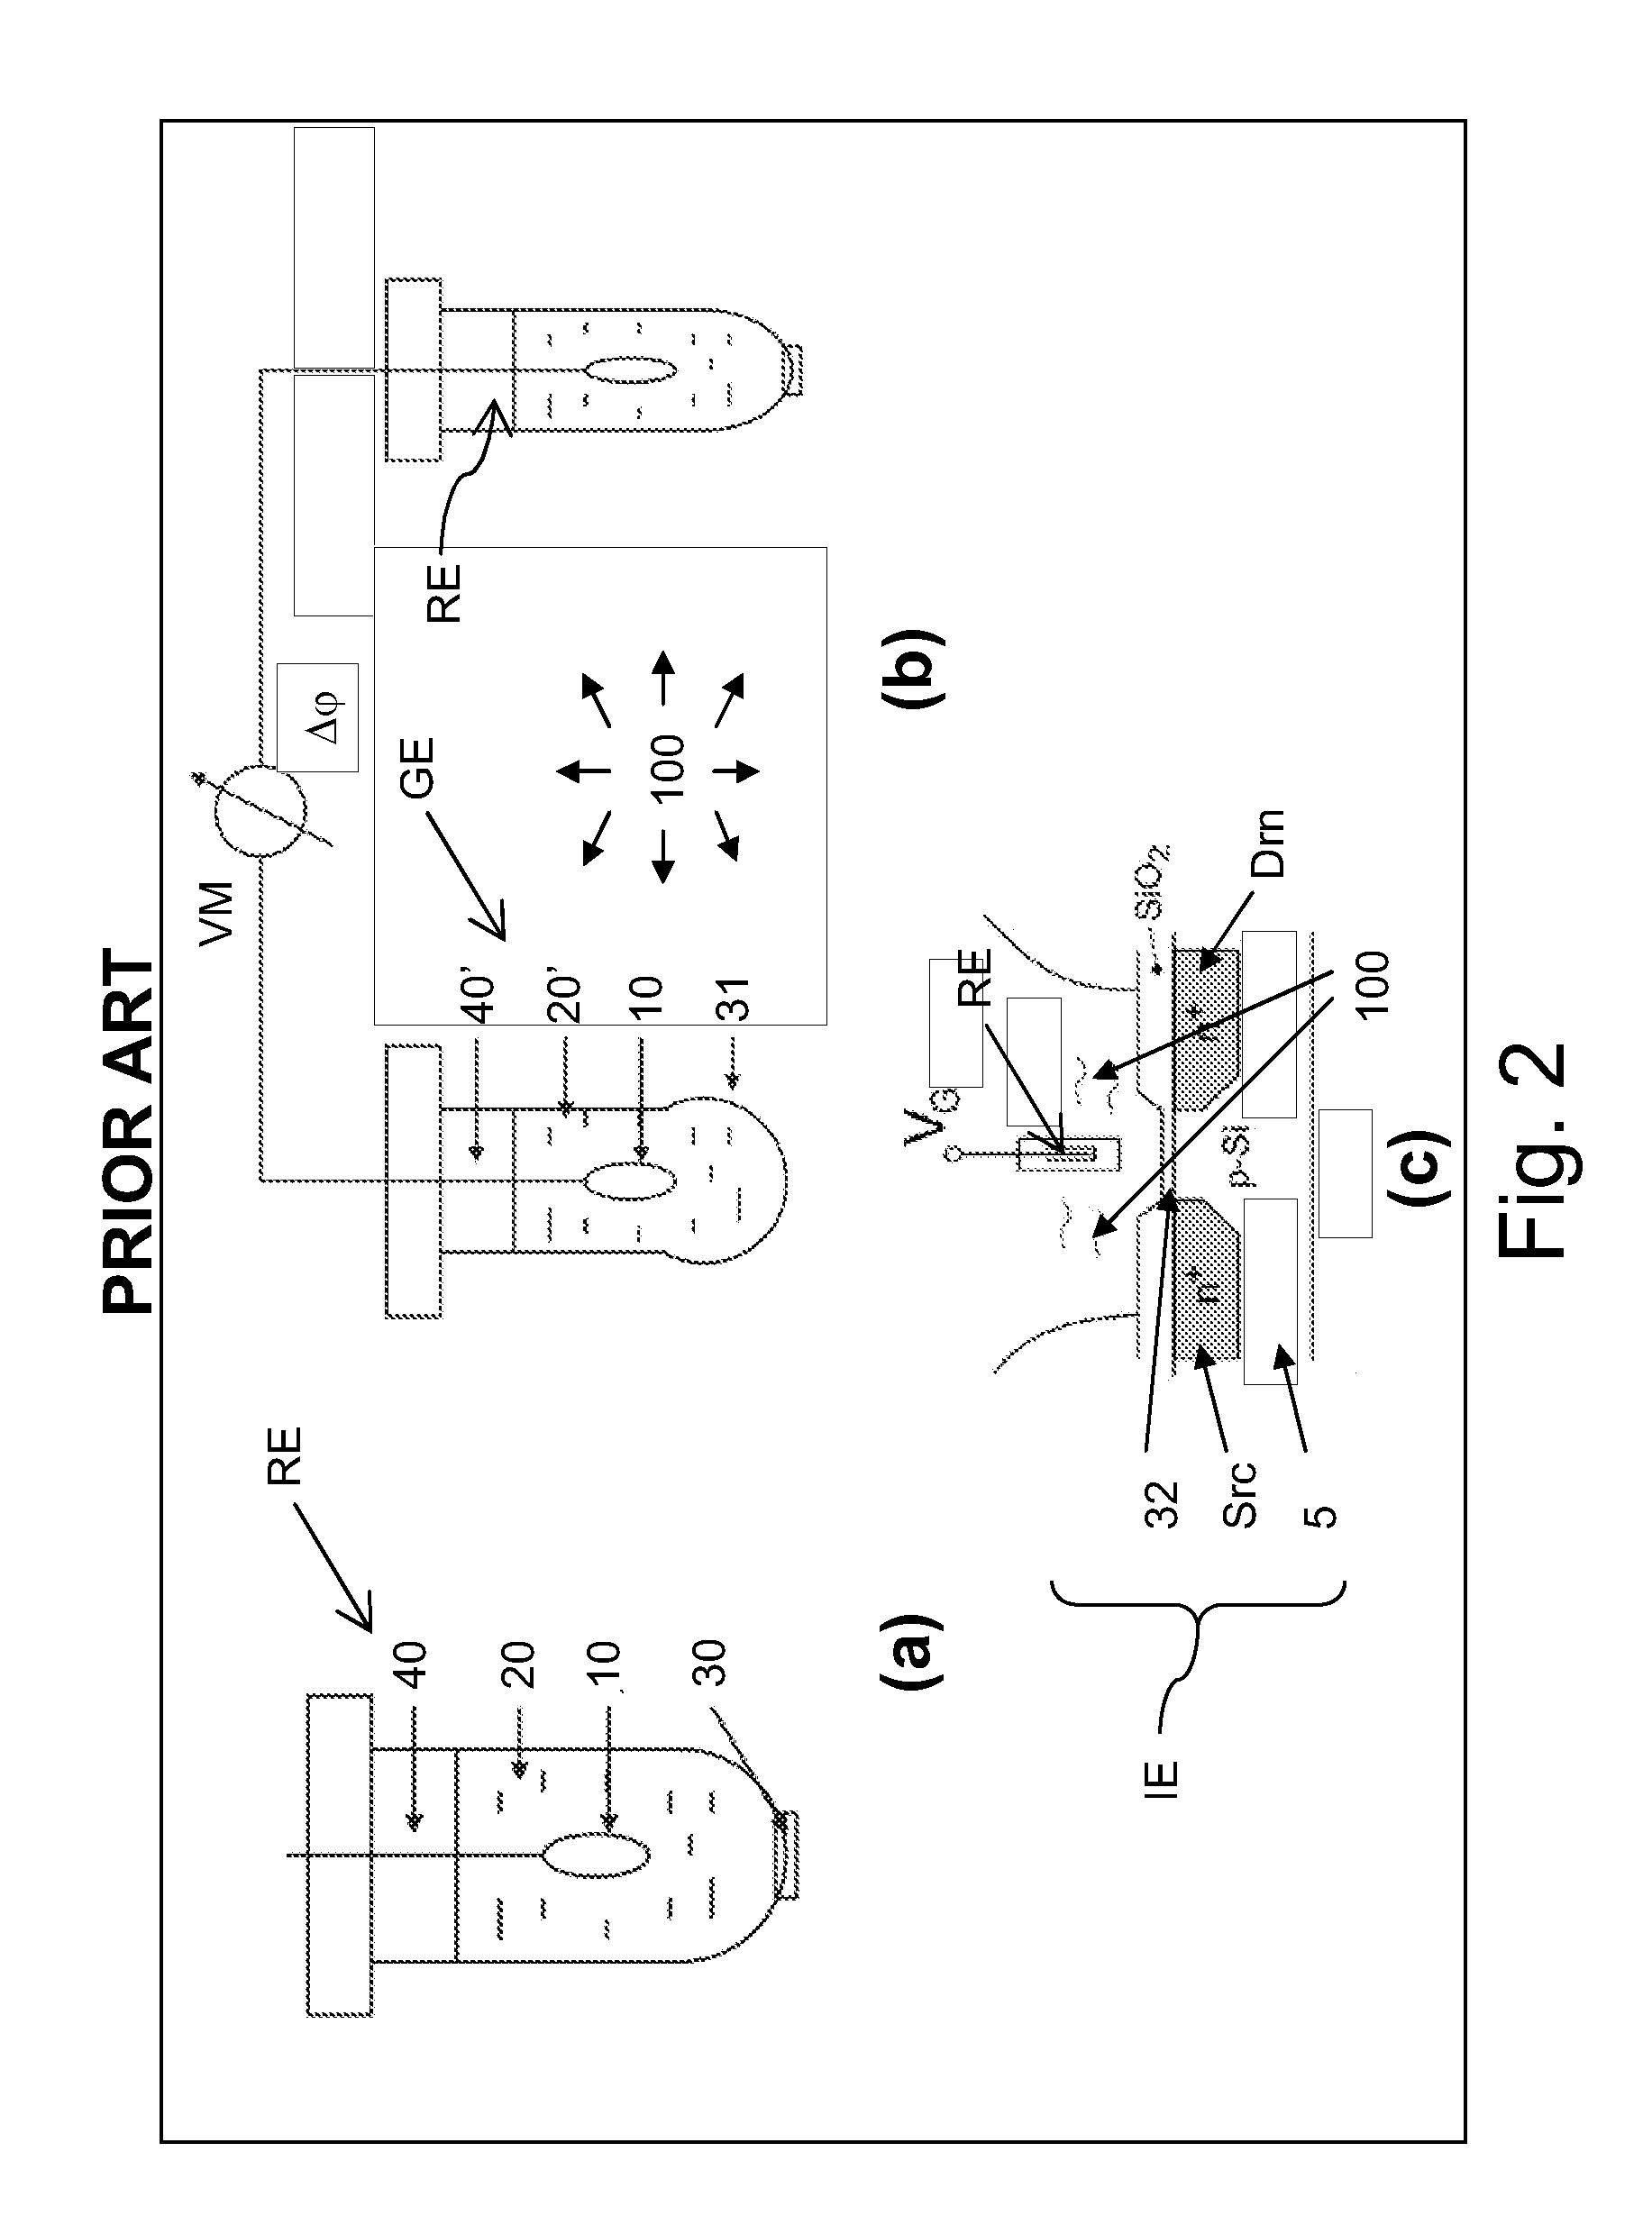 Electrochemical potentiometric sensing without reference electrode